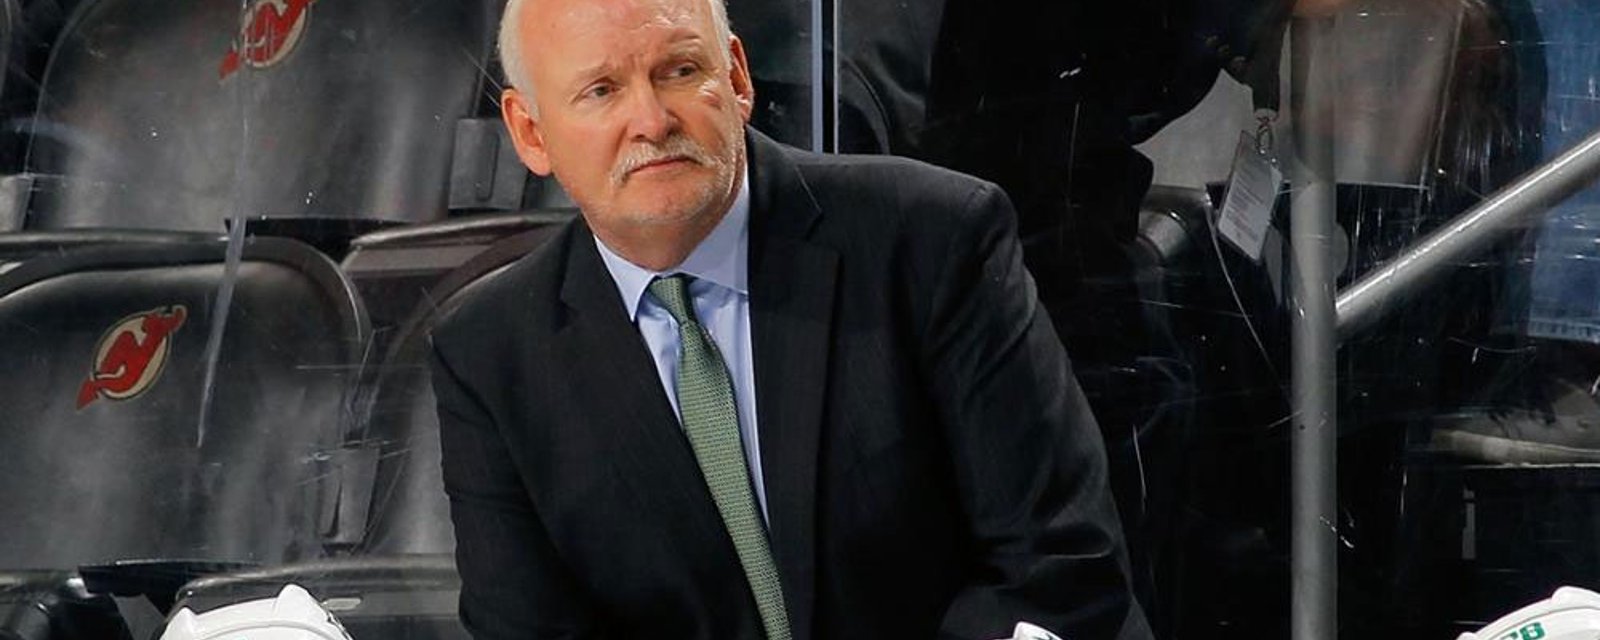 Lindy Ruff was not Devils’s first choice, settled because of failed negotiations 